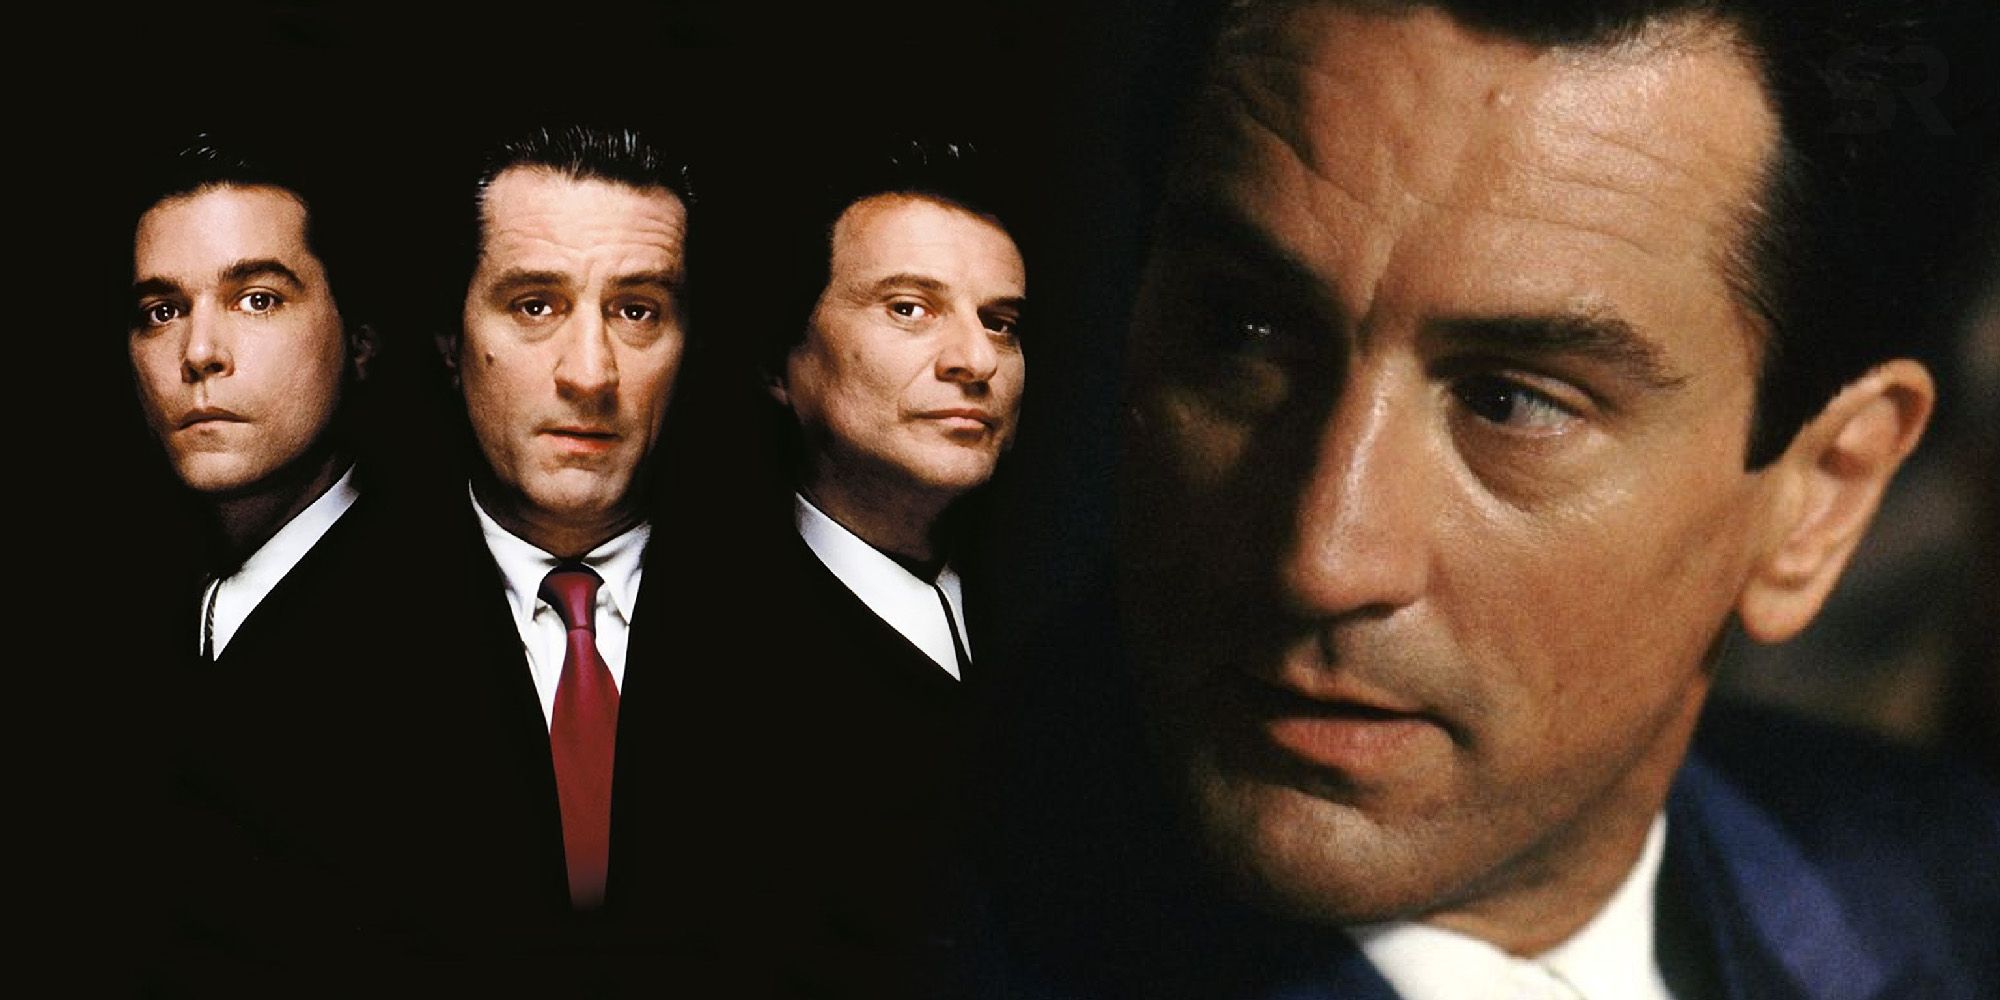 Split side-by-side of Henry, Jimmy, and Tommy in Goodfellas and close-up of Jimmy looking concerned